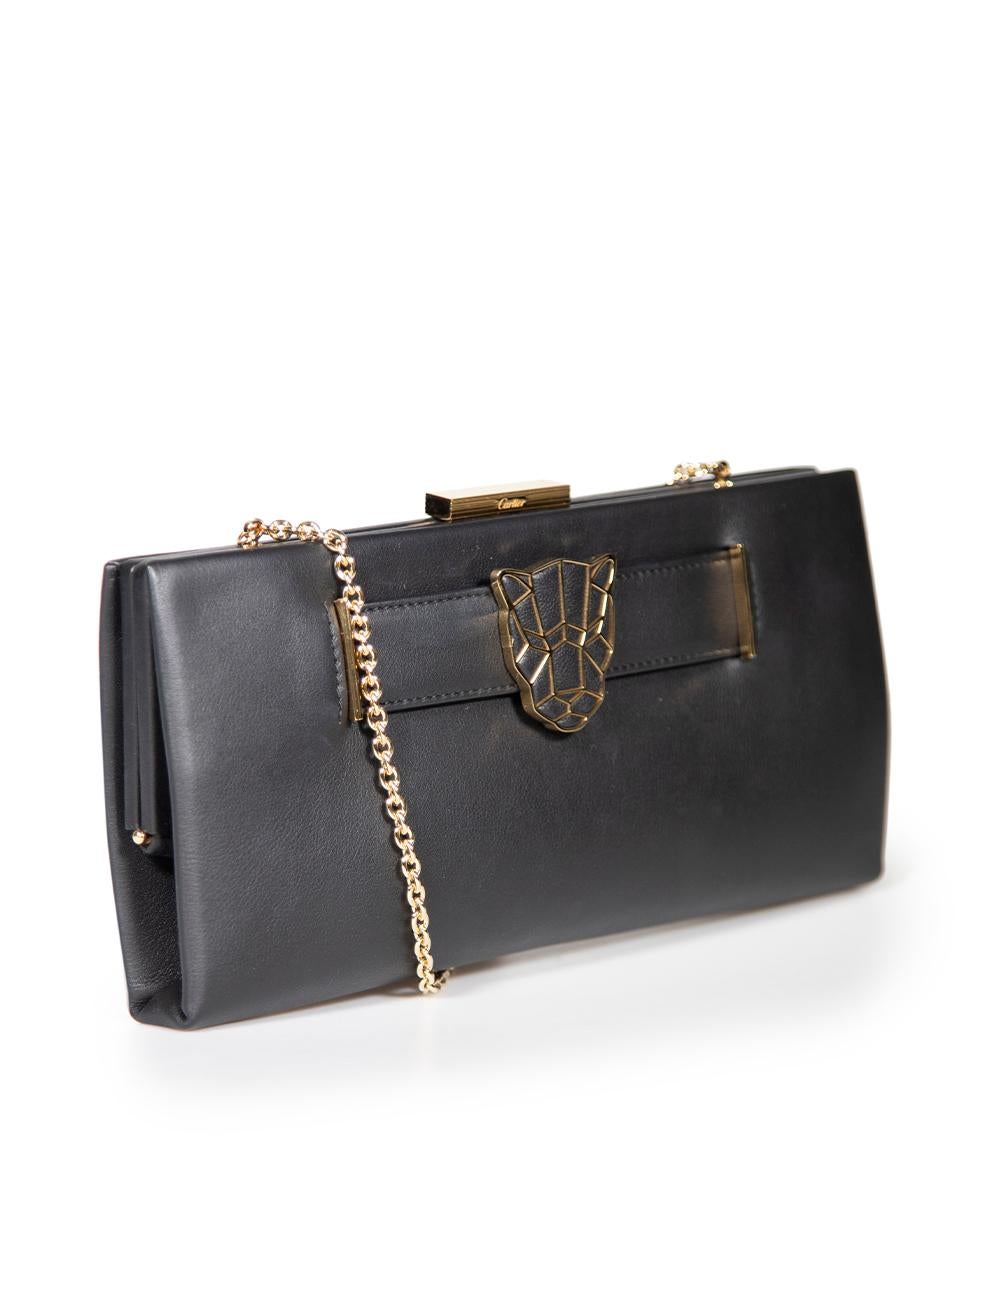 CONDITION is Very good. Hardly any visible wear to clutch bag is evident on this used Cartier designer resale item. Comes with original dust bag.
 
 
 
 Details
 
 
 Panthère
 
 Black
 
 Leather
 
 Clutch
 
 Gold tone hardware
 
 Panther buckle